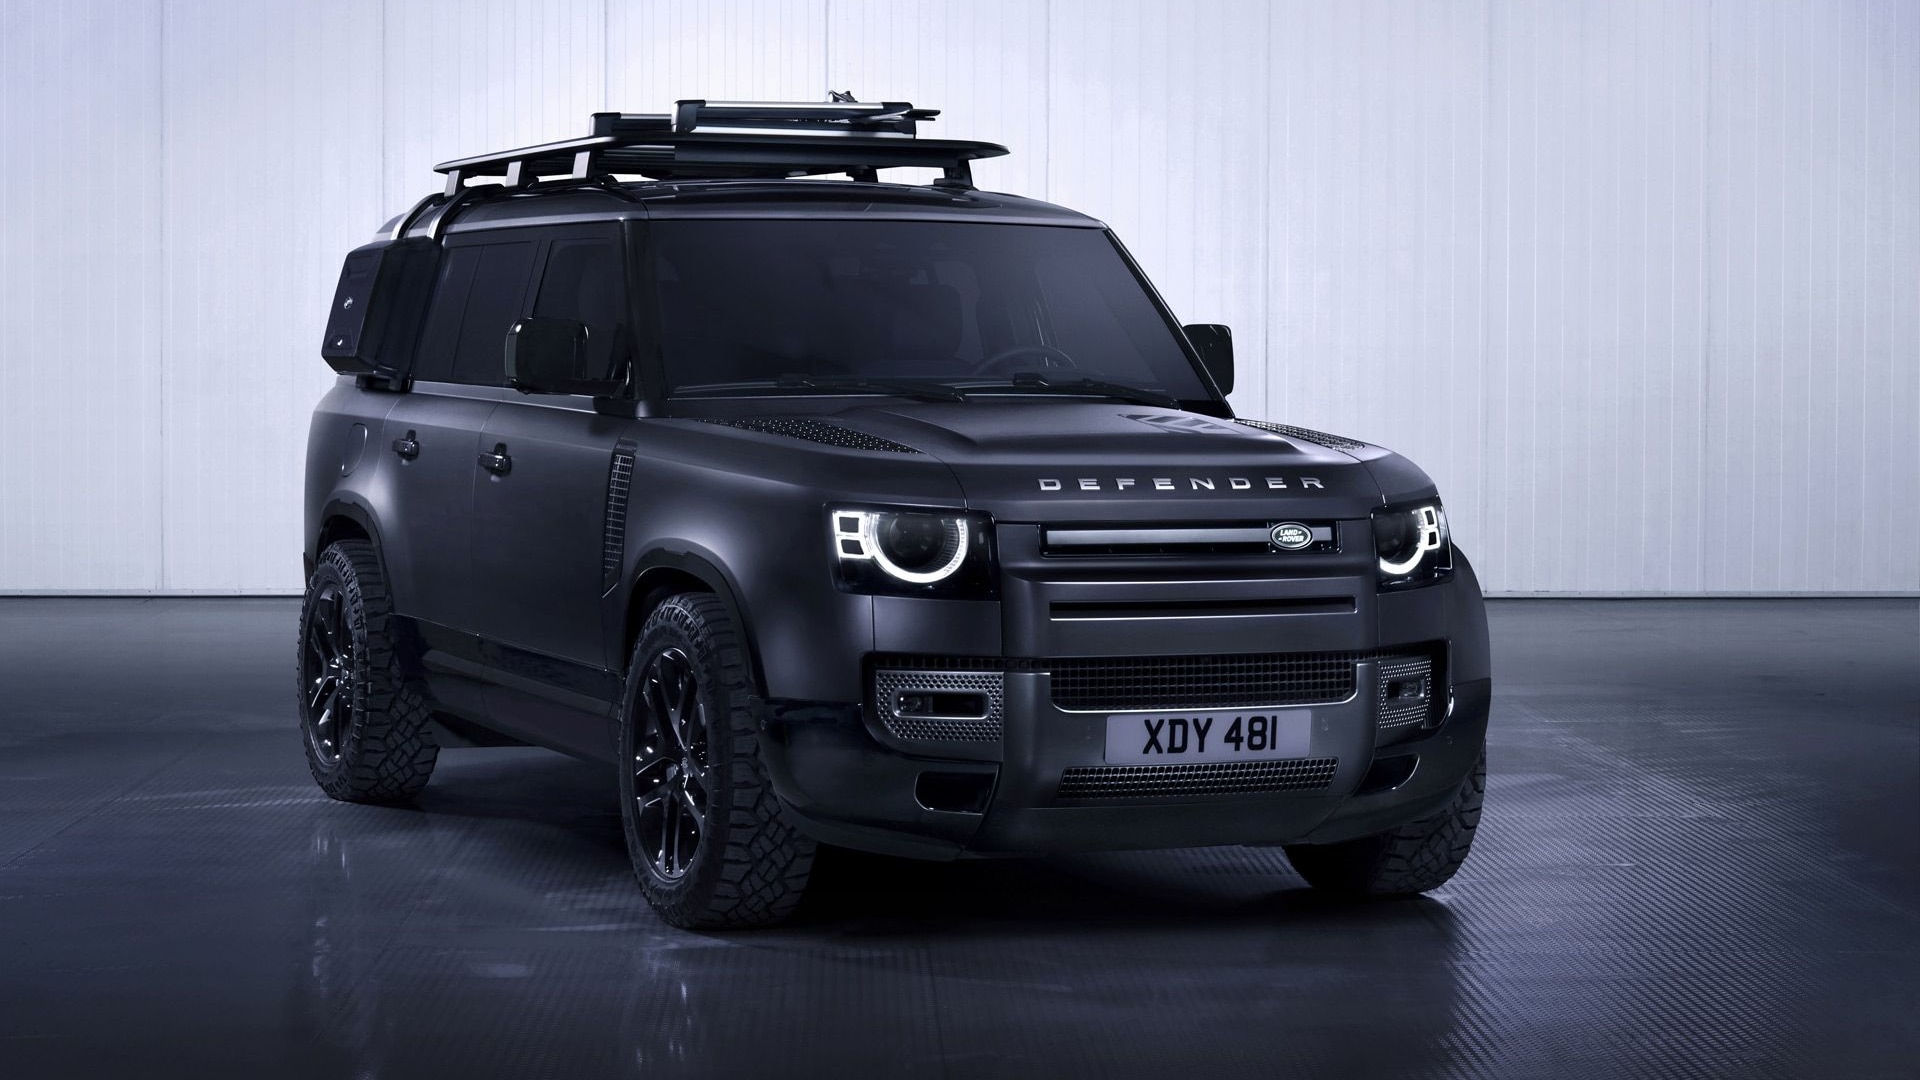 Land Rover Defender 130 Unveiled Globally, is the Most Hardcore 8-Seater  SUV You Can Buy - News18